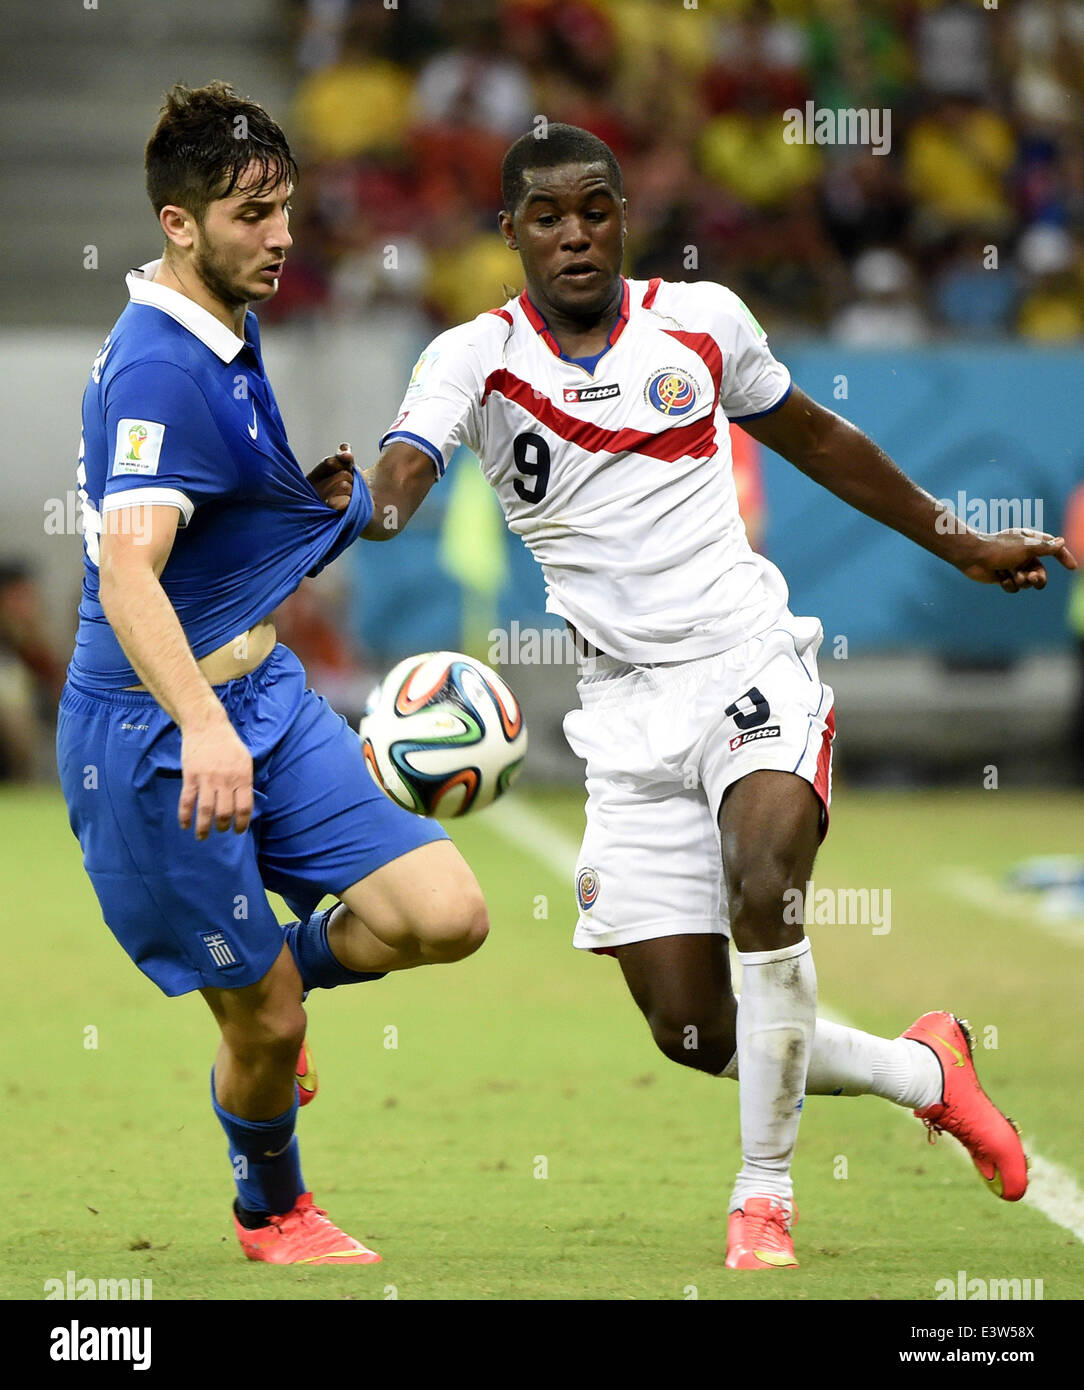 Recife, Brazil. 29th June, 2014. Costa Rica's Joel Campbell (R) breaks through during a Round of 16 match between Costa Rica and Greece of 2014 FIFA World Cup at the Arena Pernambuco Stadium in Recife, Brazil, on June 29, 2014. Credit:  Lui Siu Wai/Xinhua/Alamy Live News Stock Photo